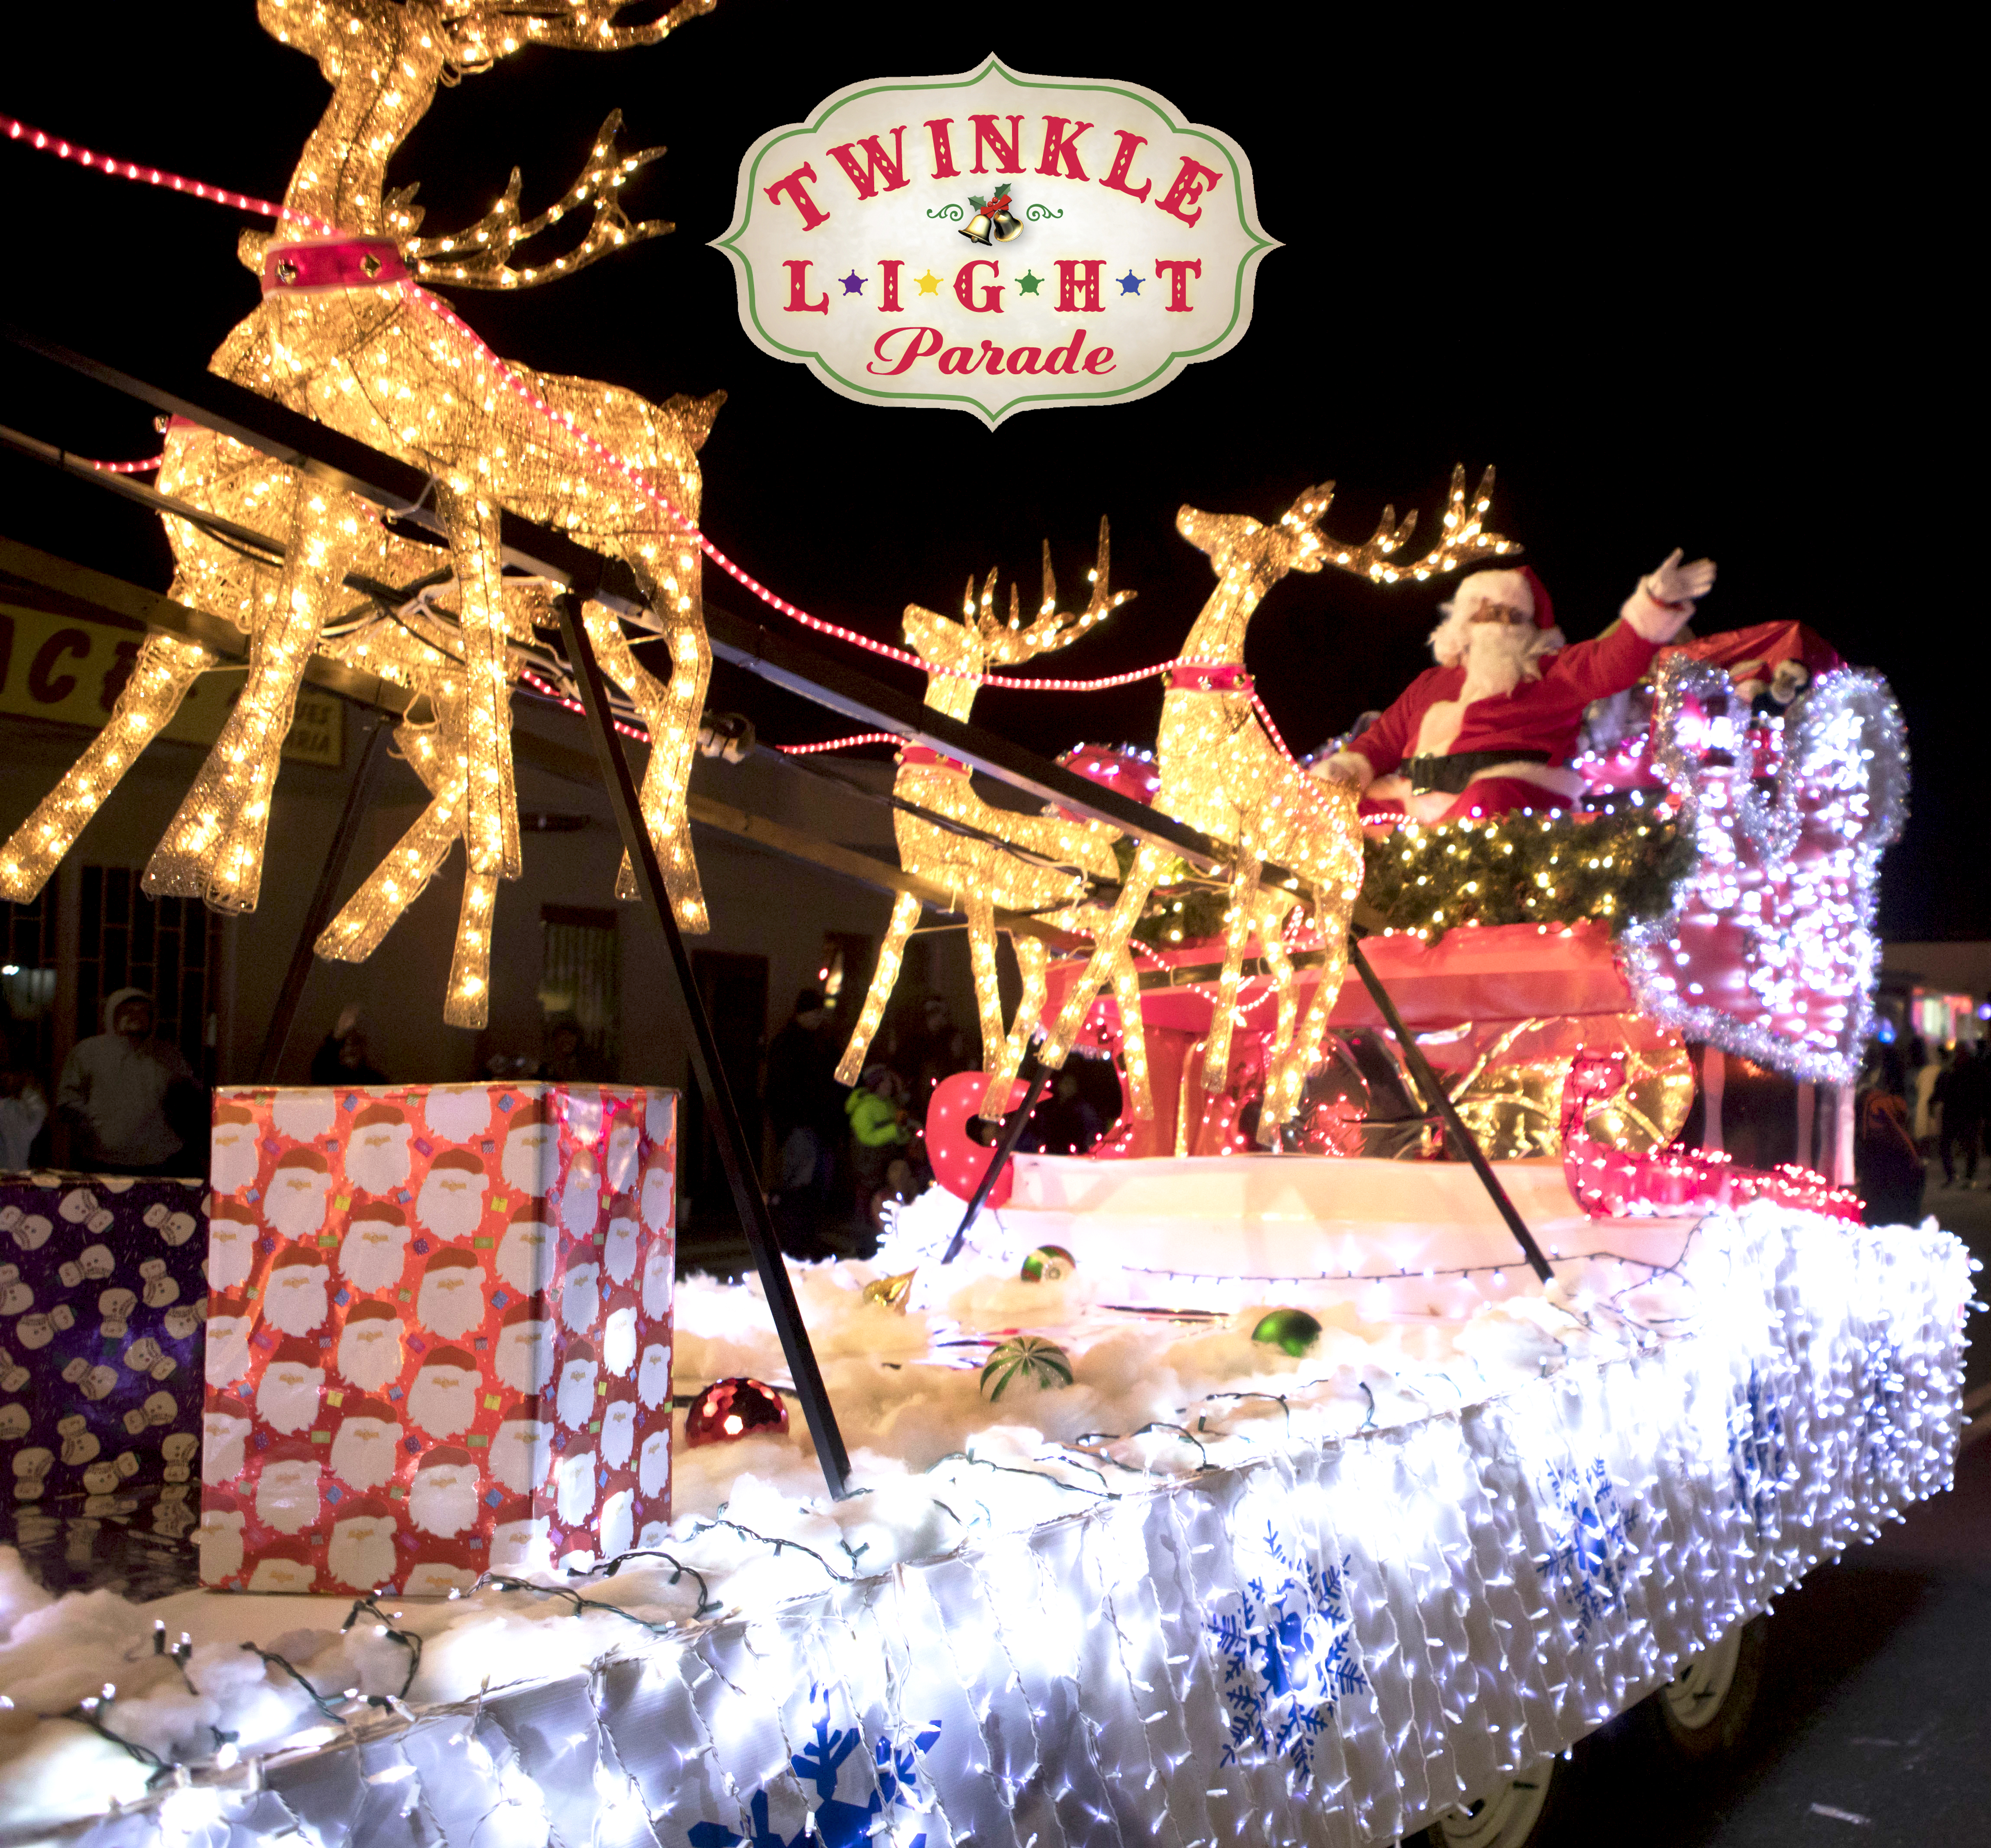 2019 Twinkle Light Parade - Placeholder Photo